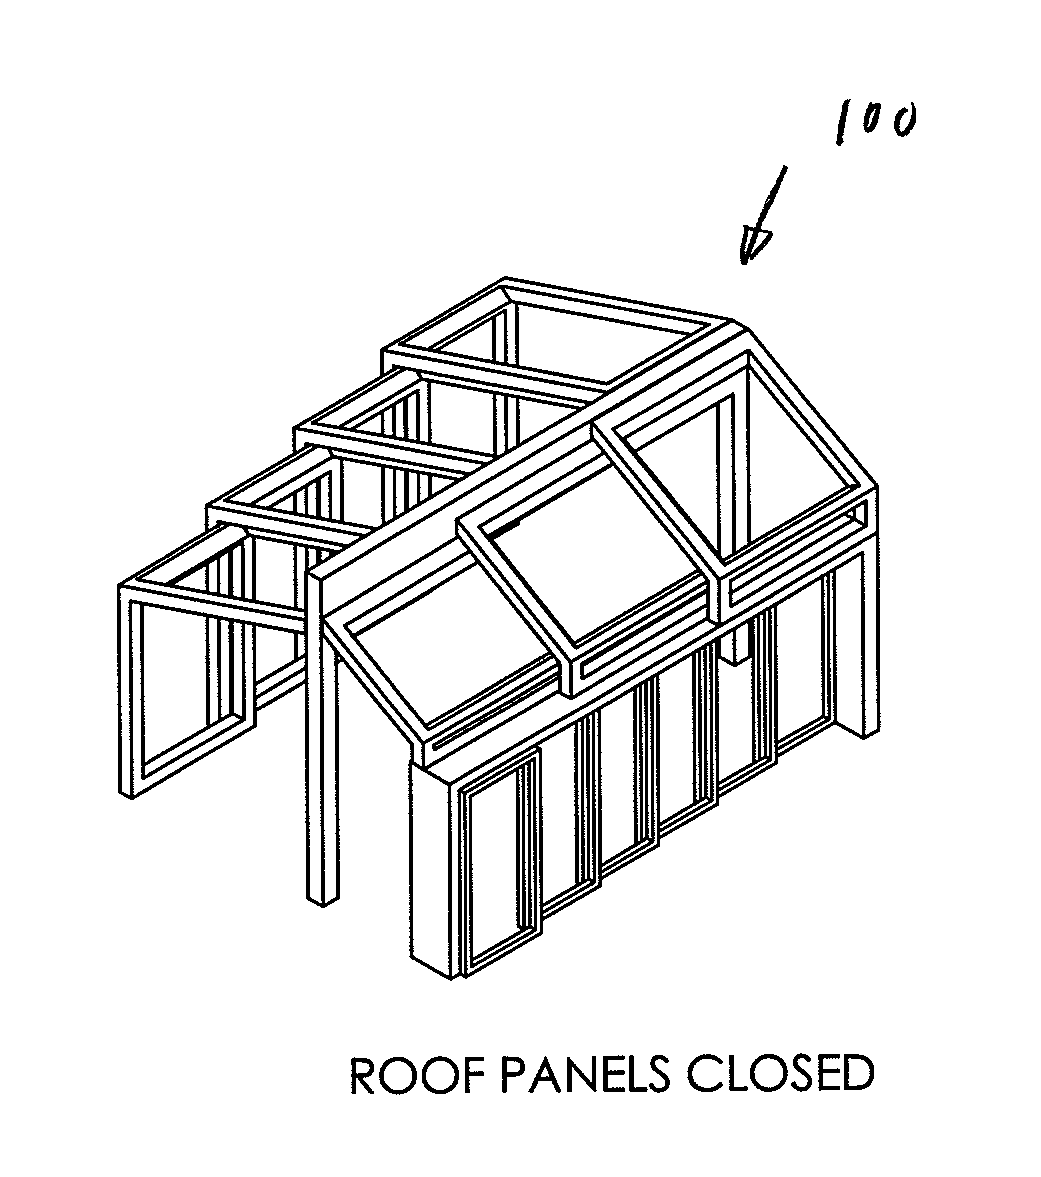 Structure having a convertible roof and sidewall